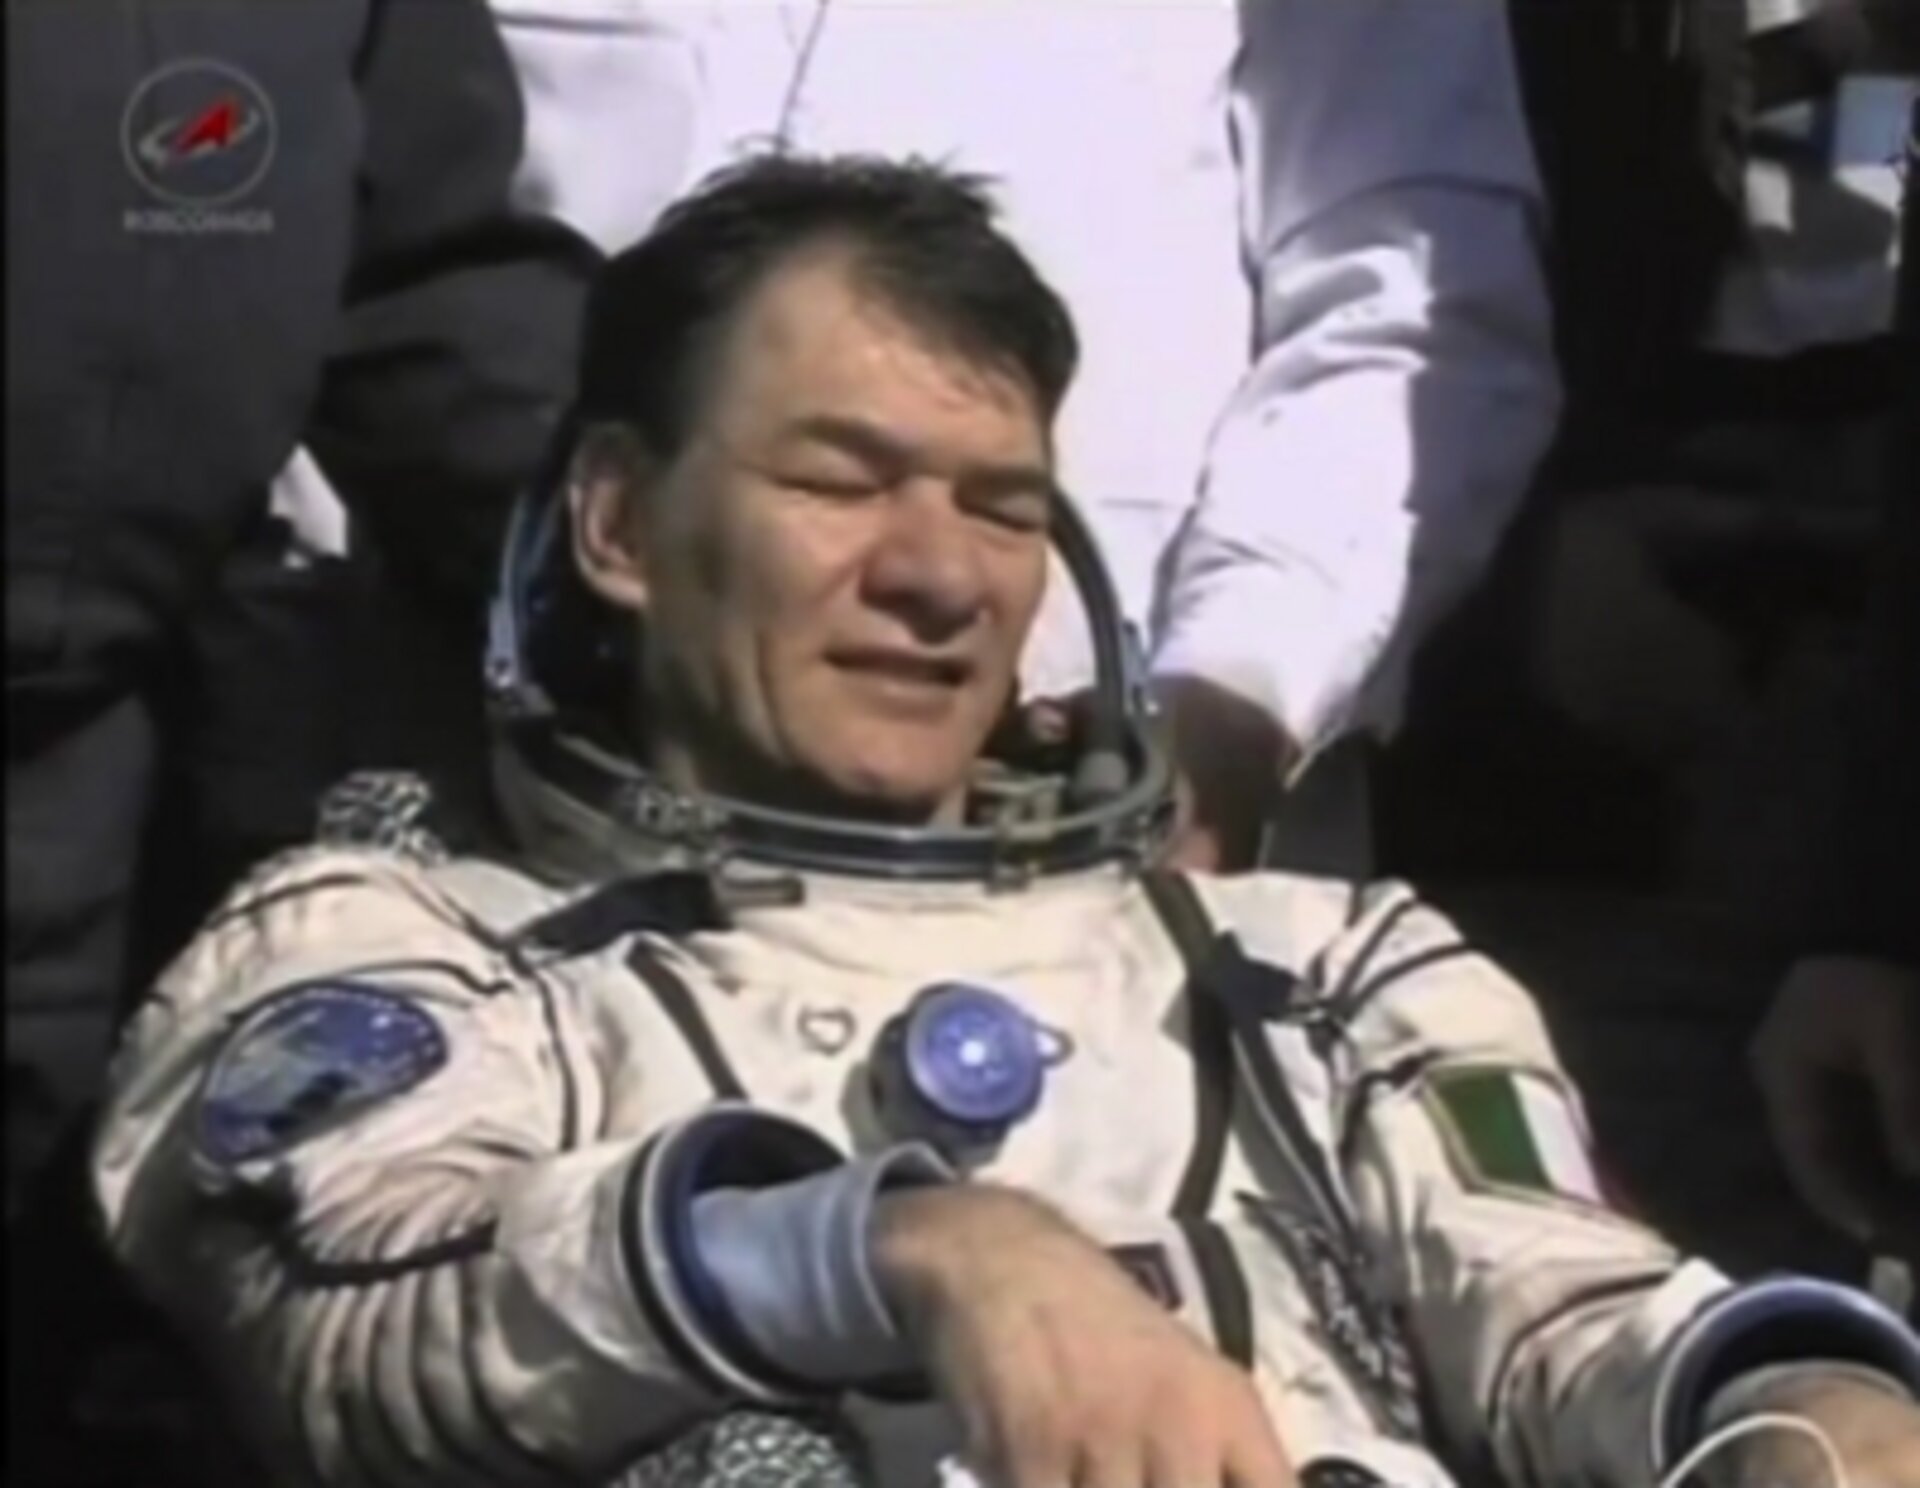 Paolo Nespoli after landing